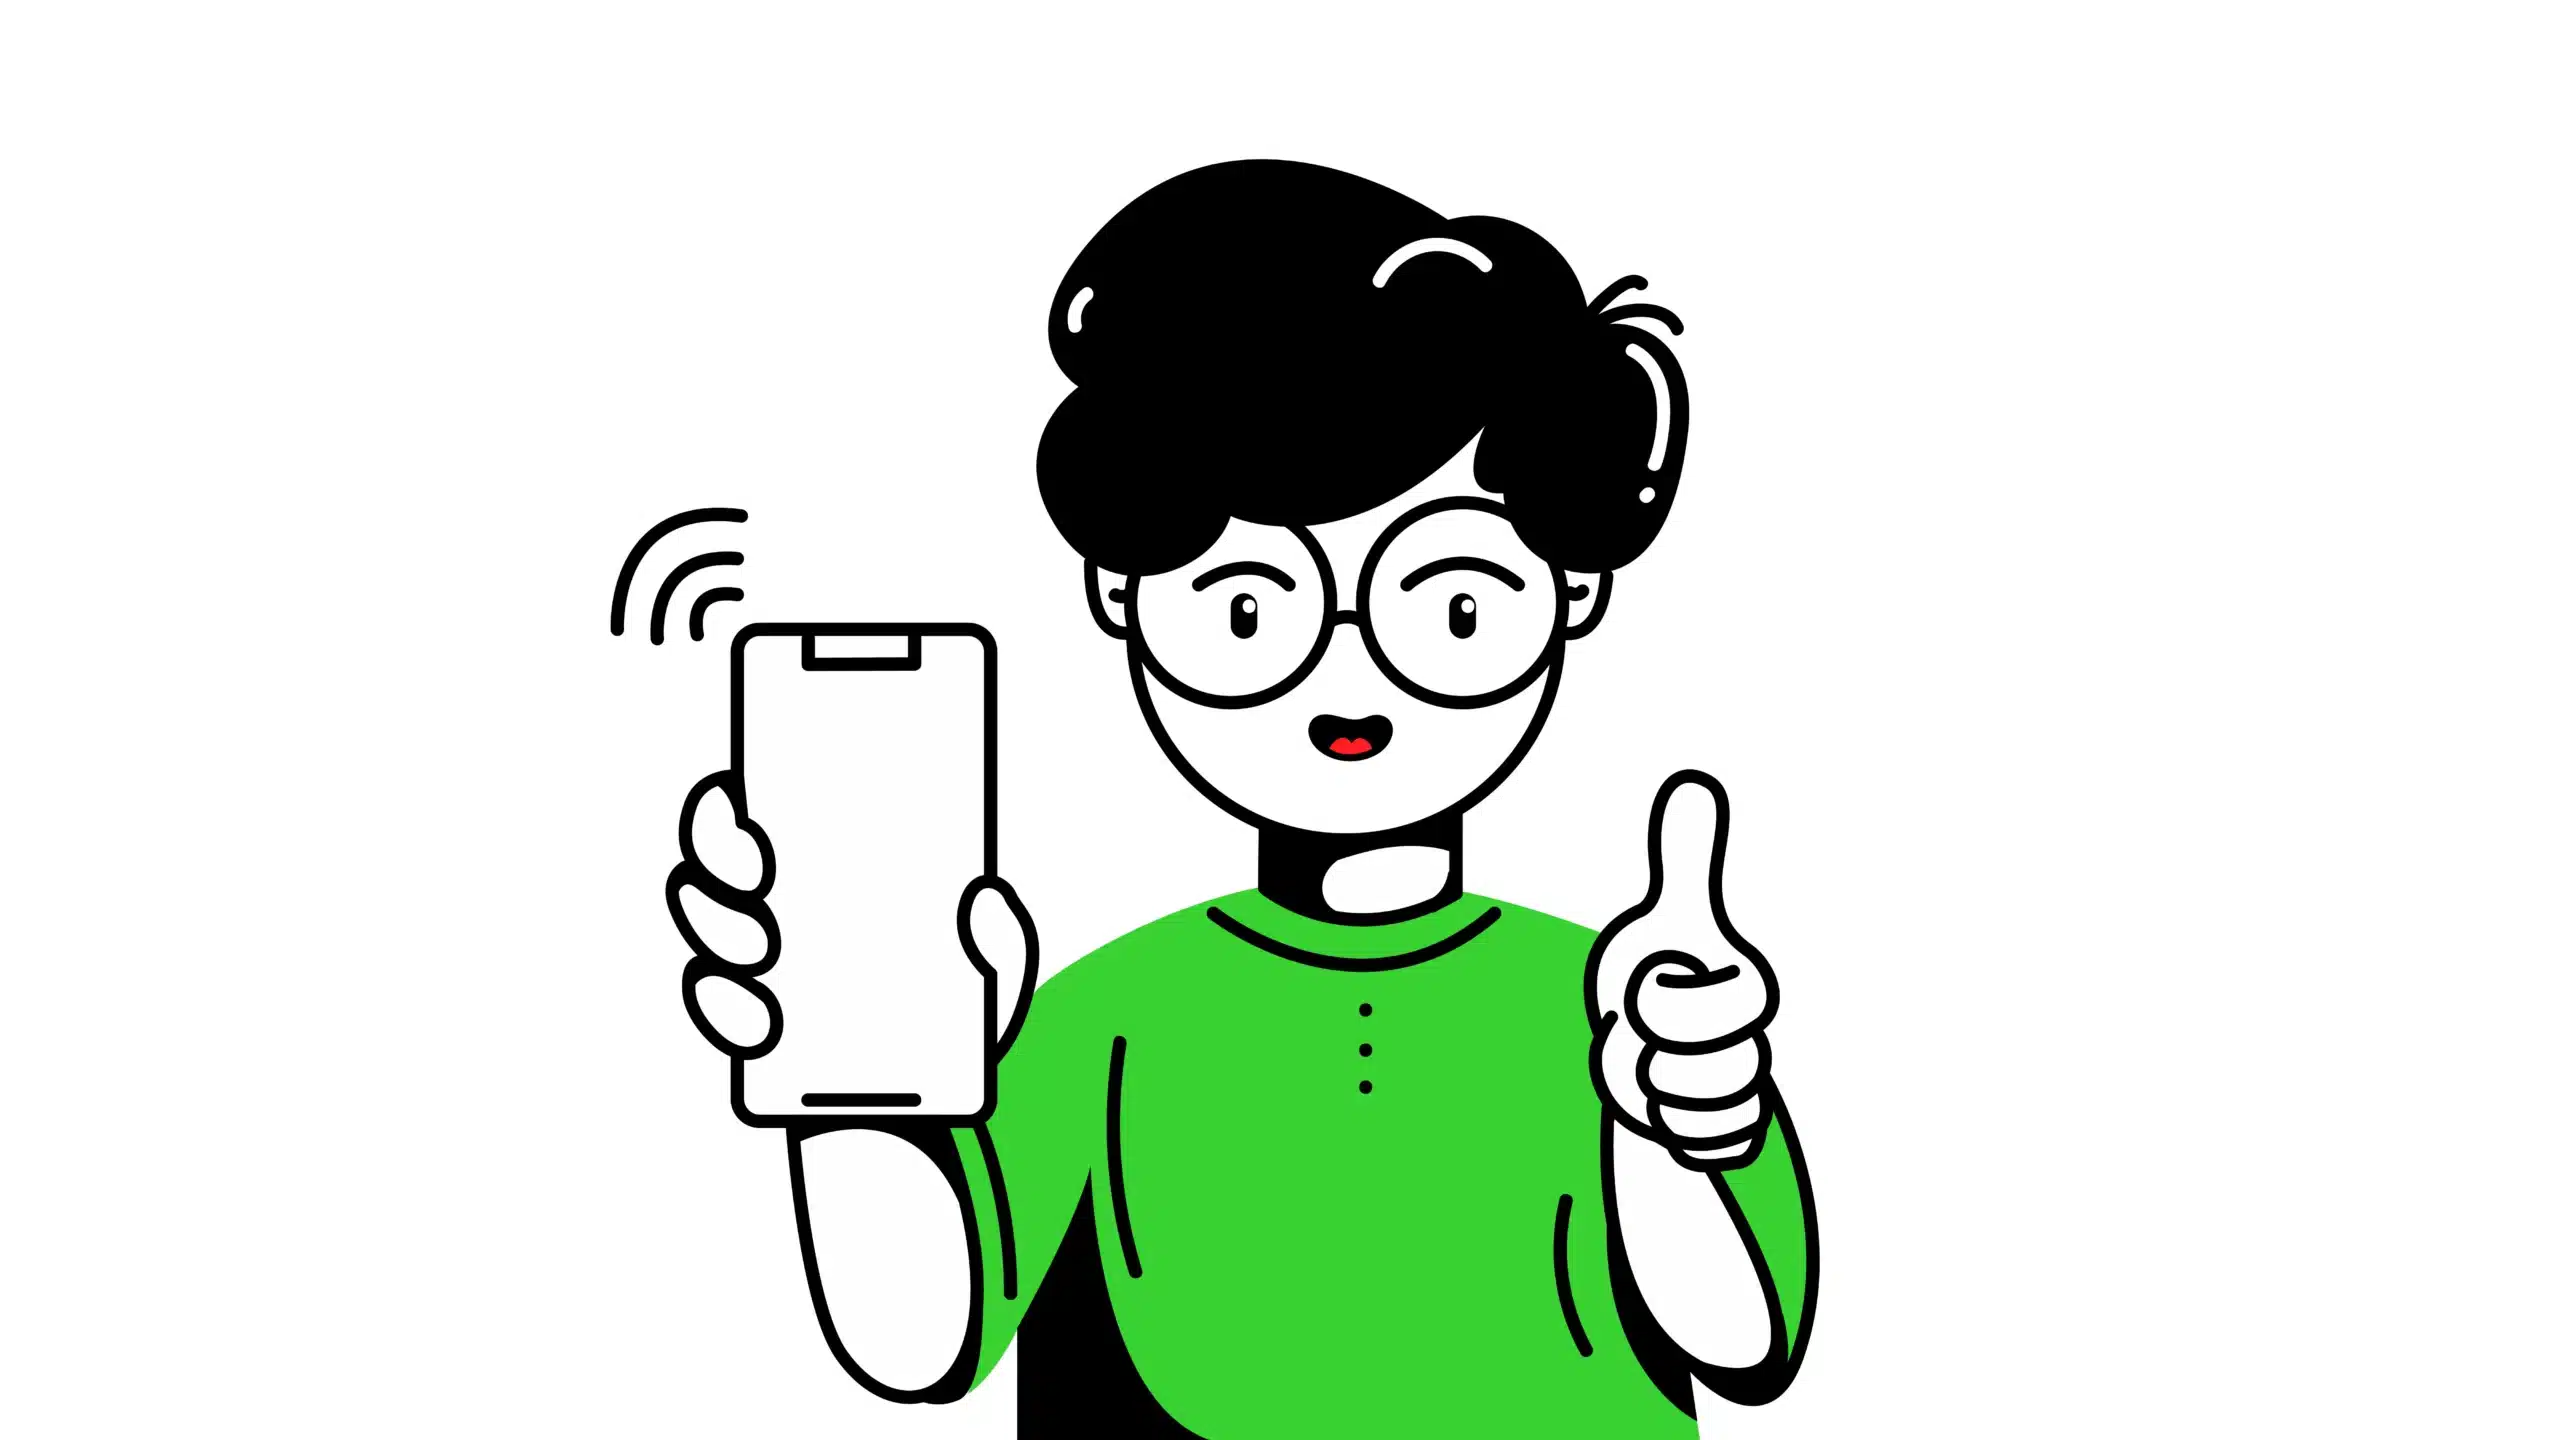 Green Character with book and thumps up